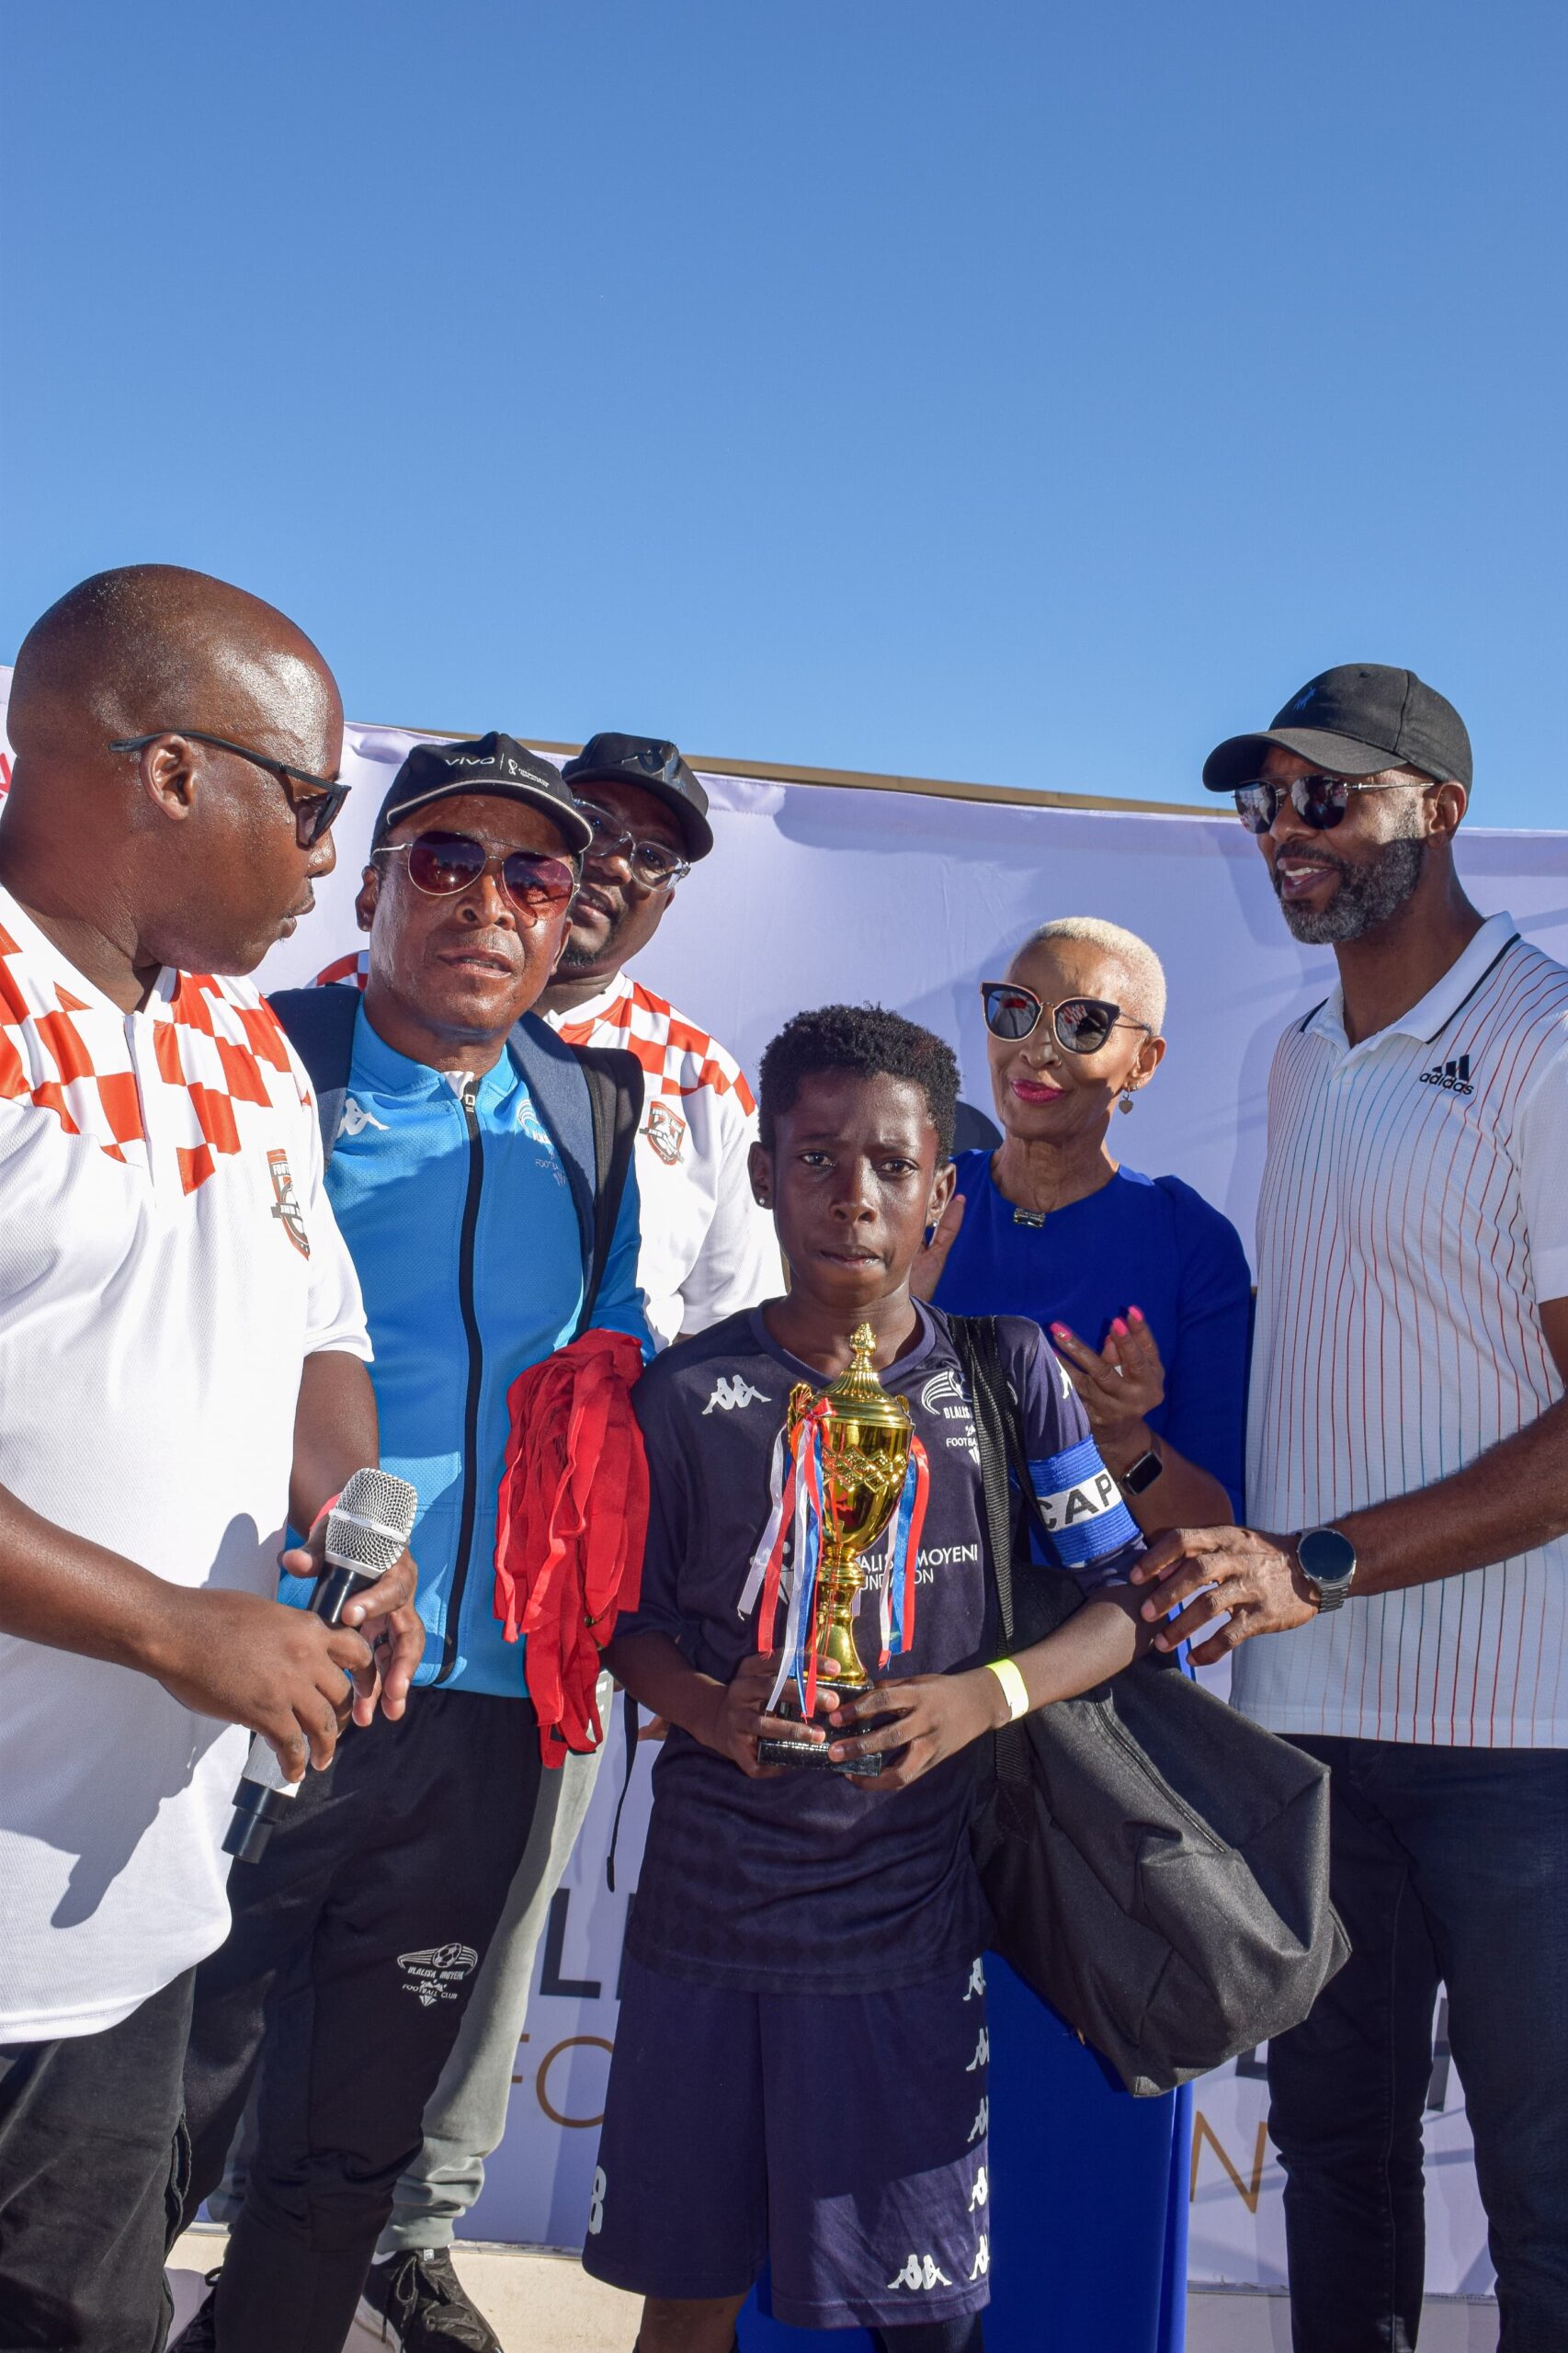 Captain of the team that won the Under 13 tournament poses for a photo with Ria Ledwaba, Lucas Radebe, coach  Ngulu and Dlalisa Foundation Spokesperson Themba Masango photo by Peter Mothiba